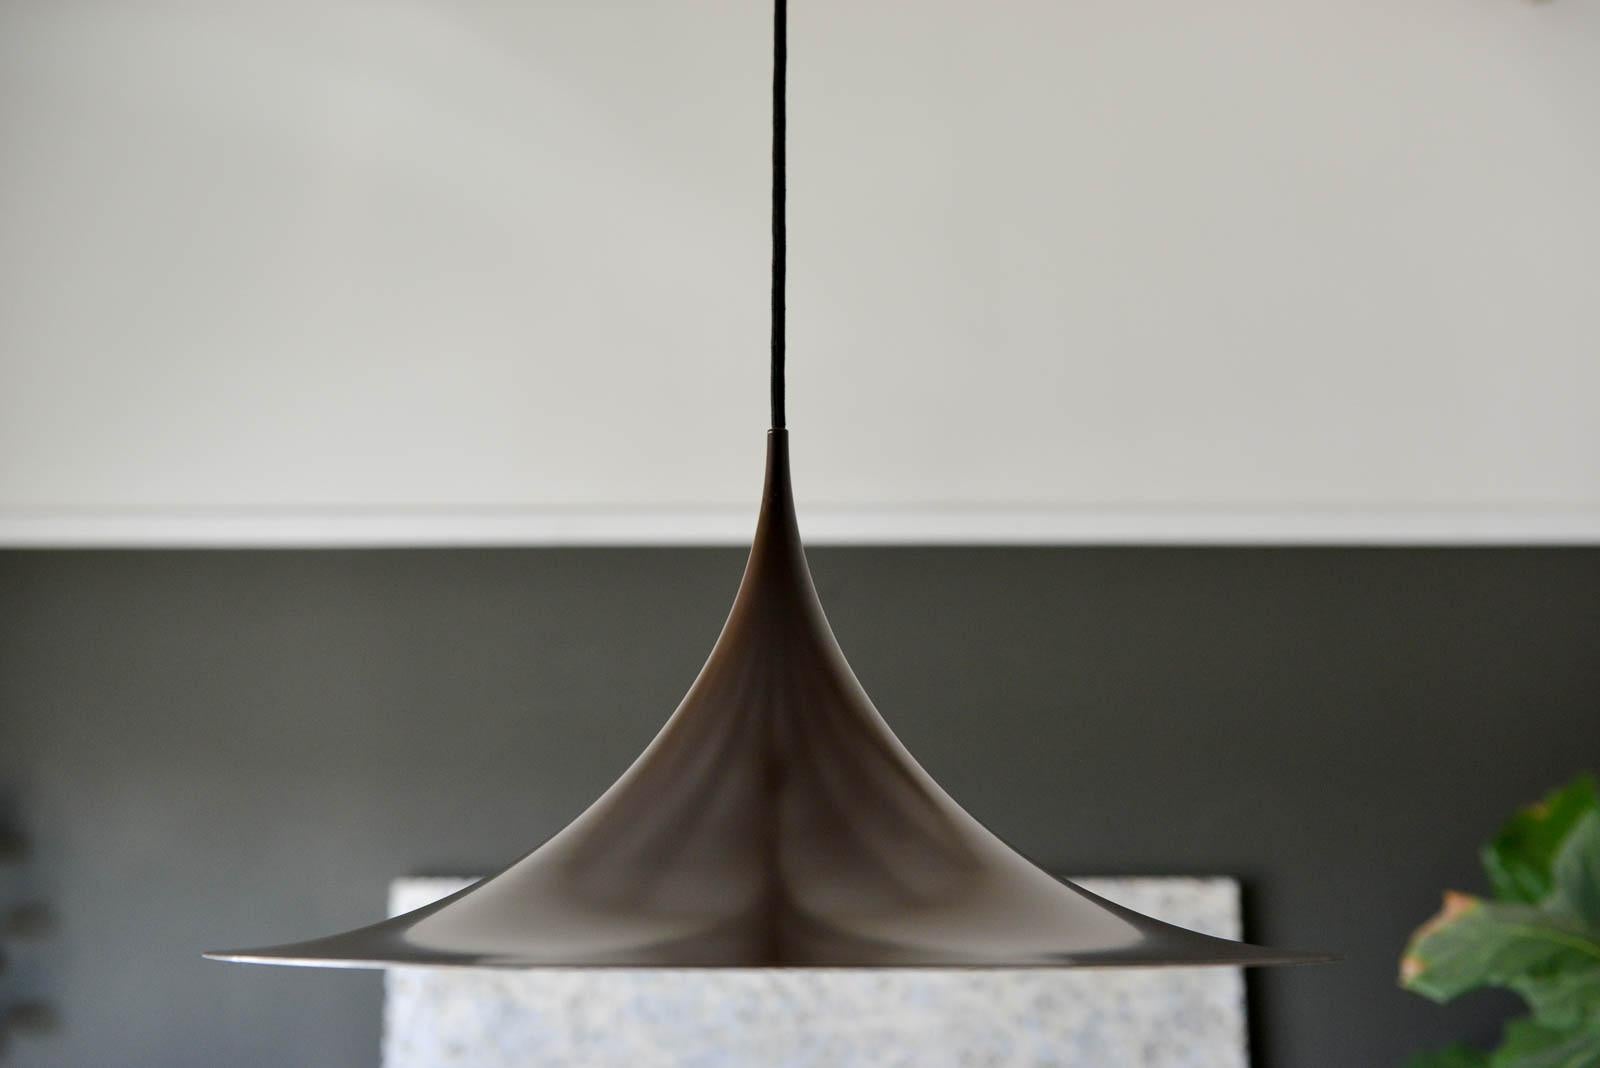 Semi pendant enameled metal light by Torsten Thorup & Claus Bonderup for Fog & Morup, circa 1965. Original chocolate brown enameled metal color, offered in catalog dated 1970. Comes with original cord, measuring 32